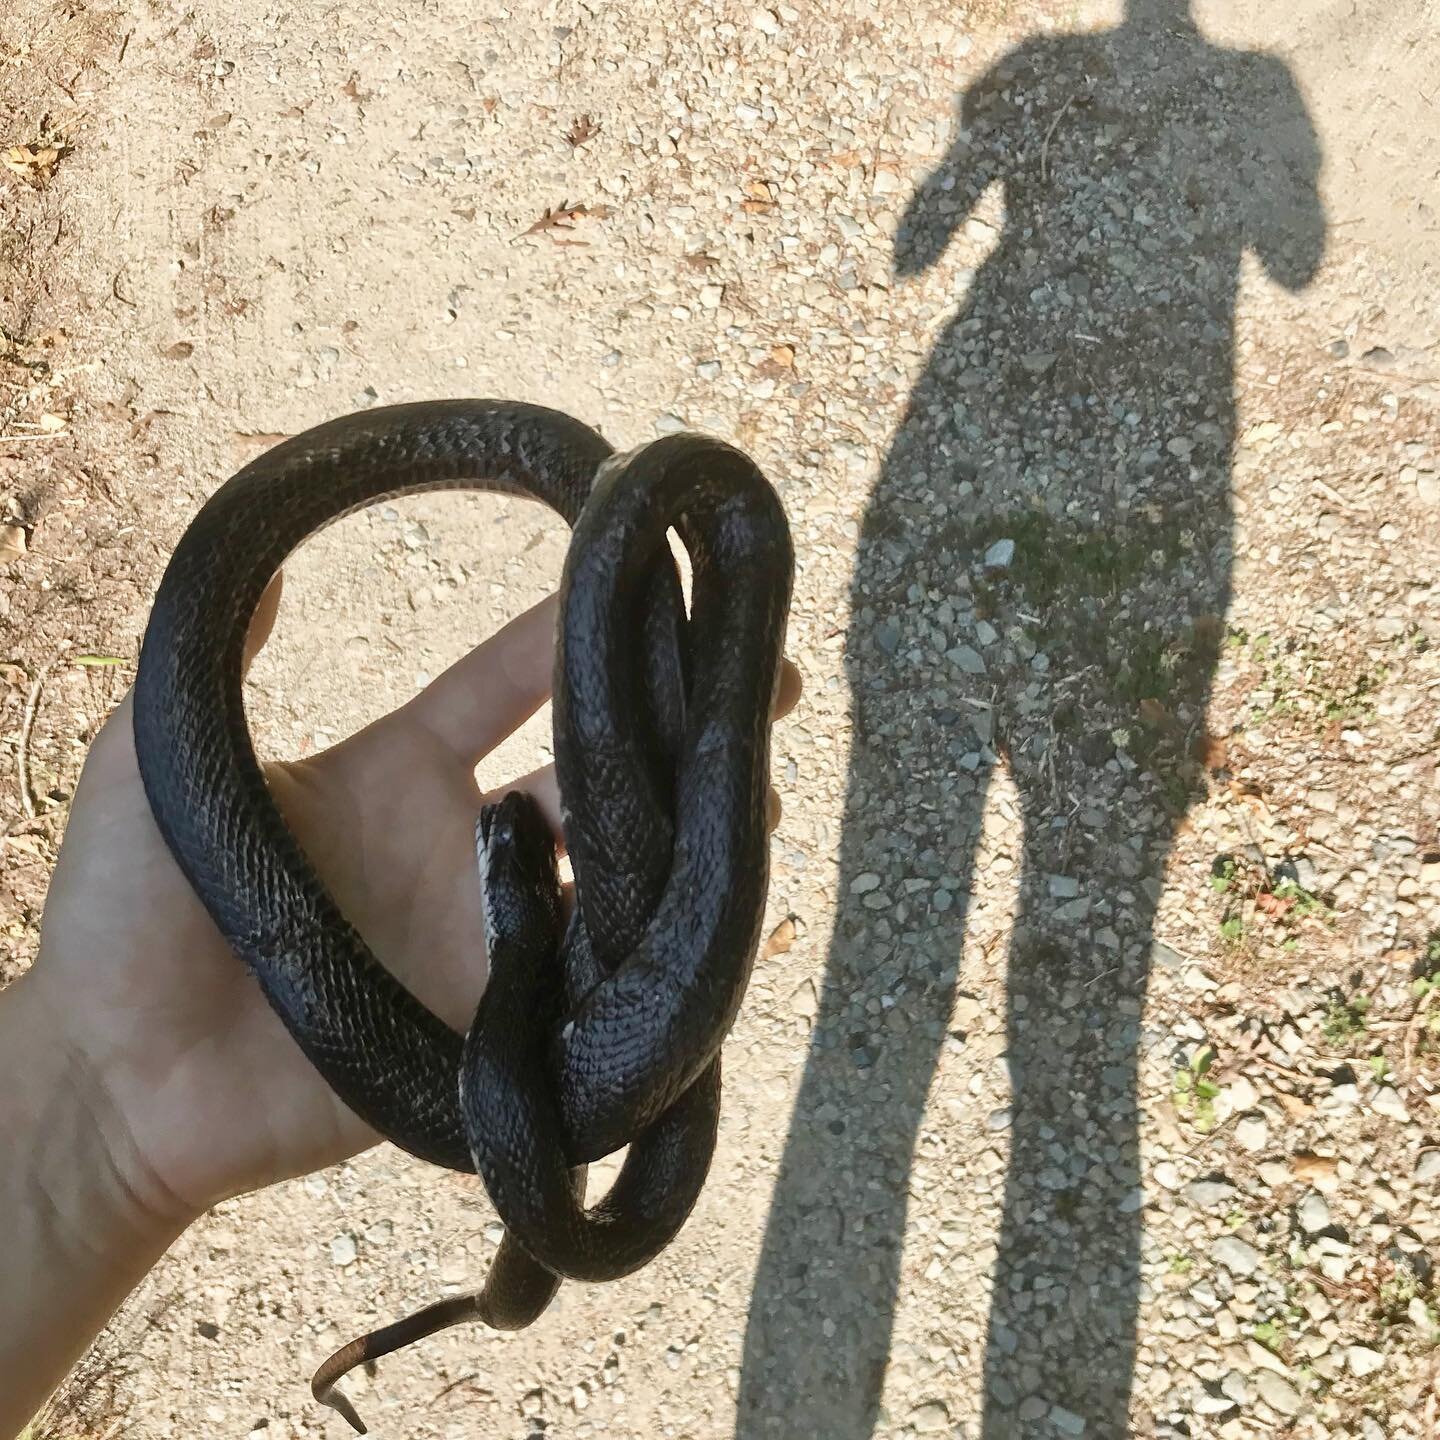 Shadows are to shed